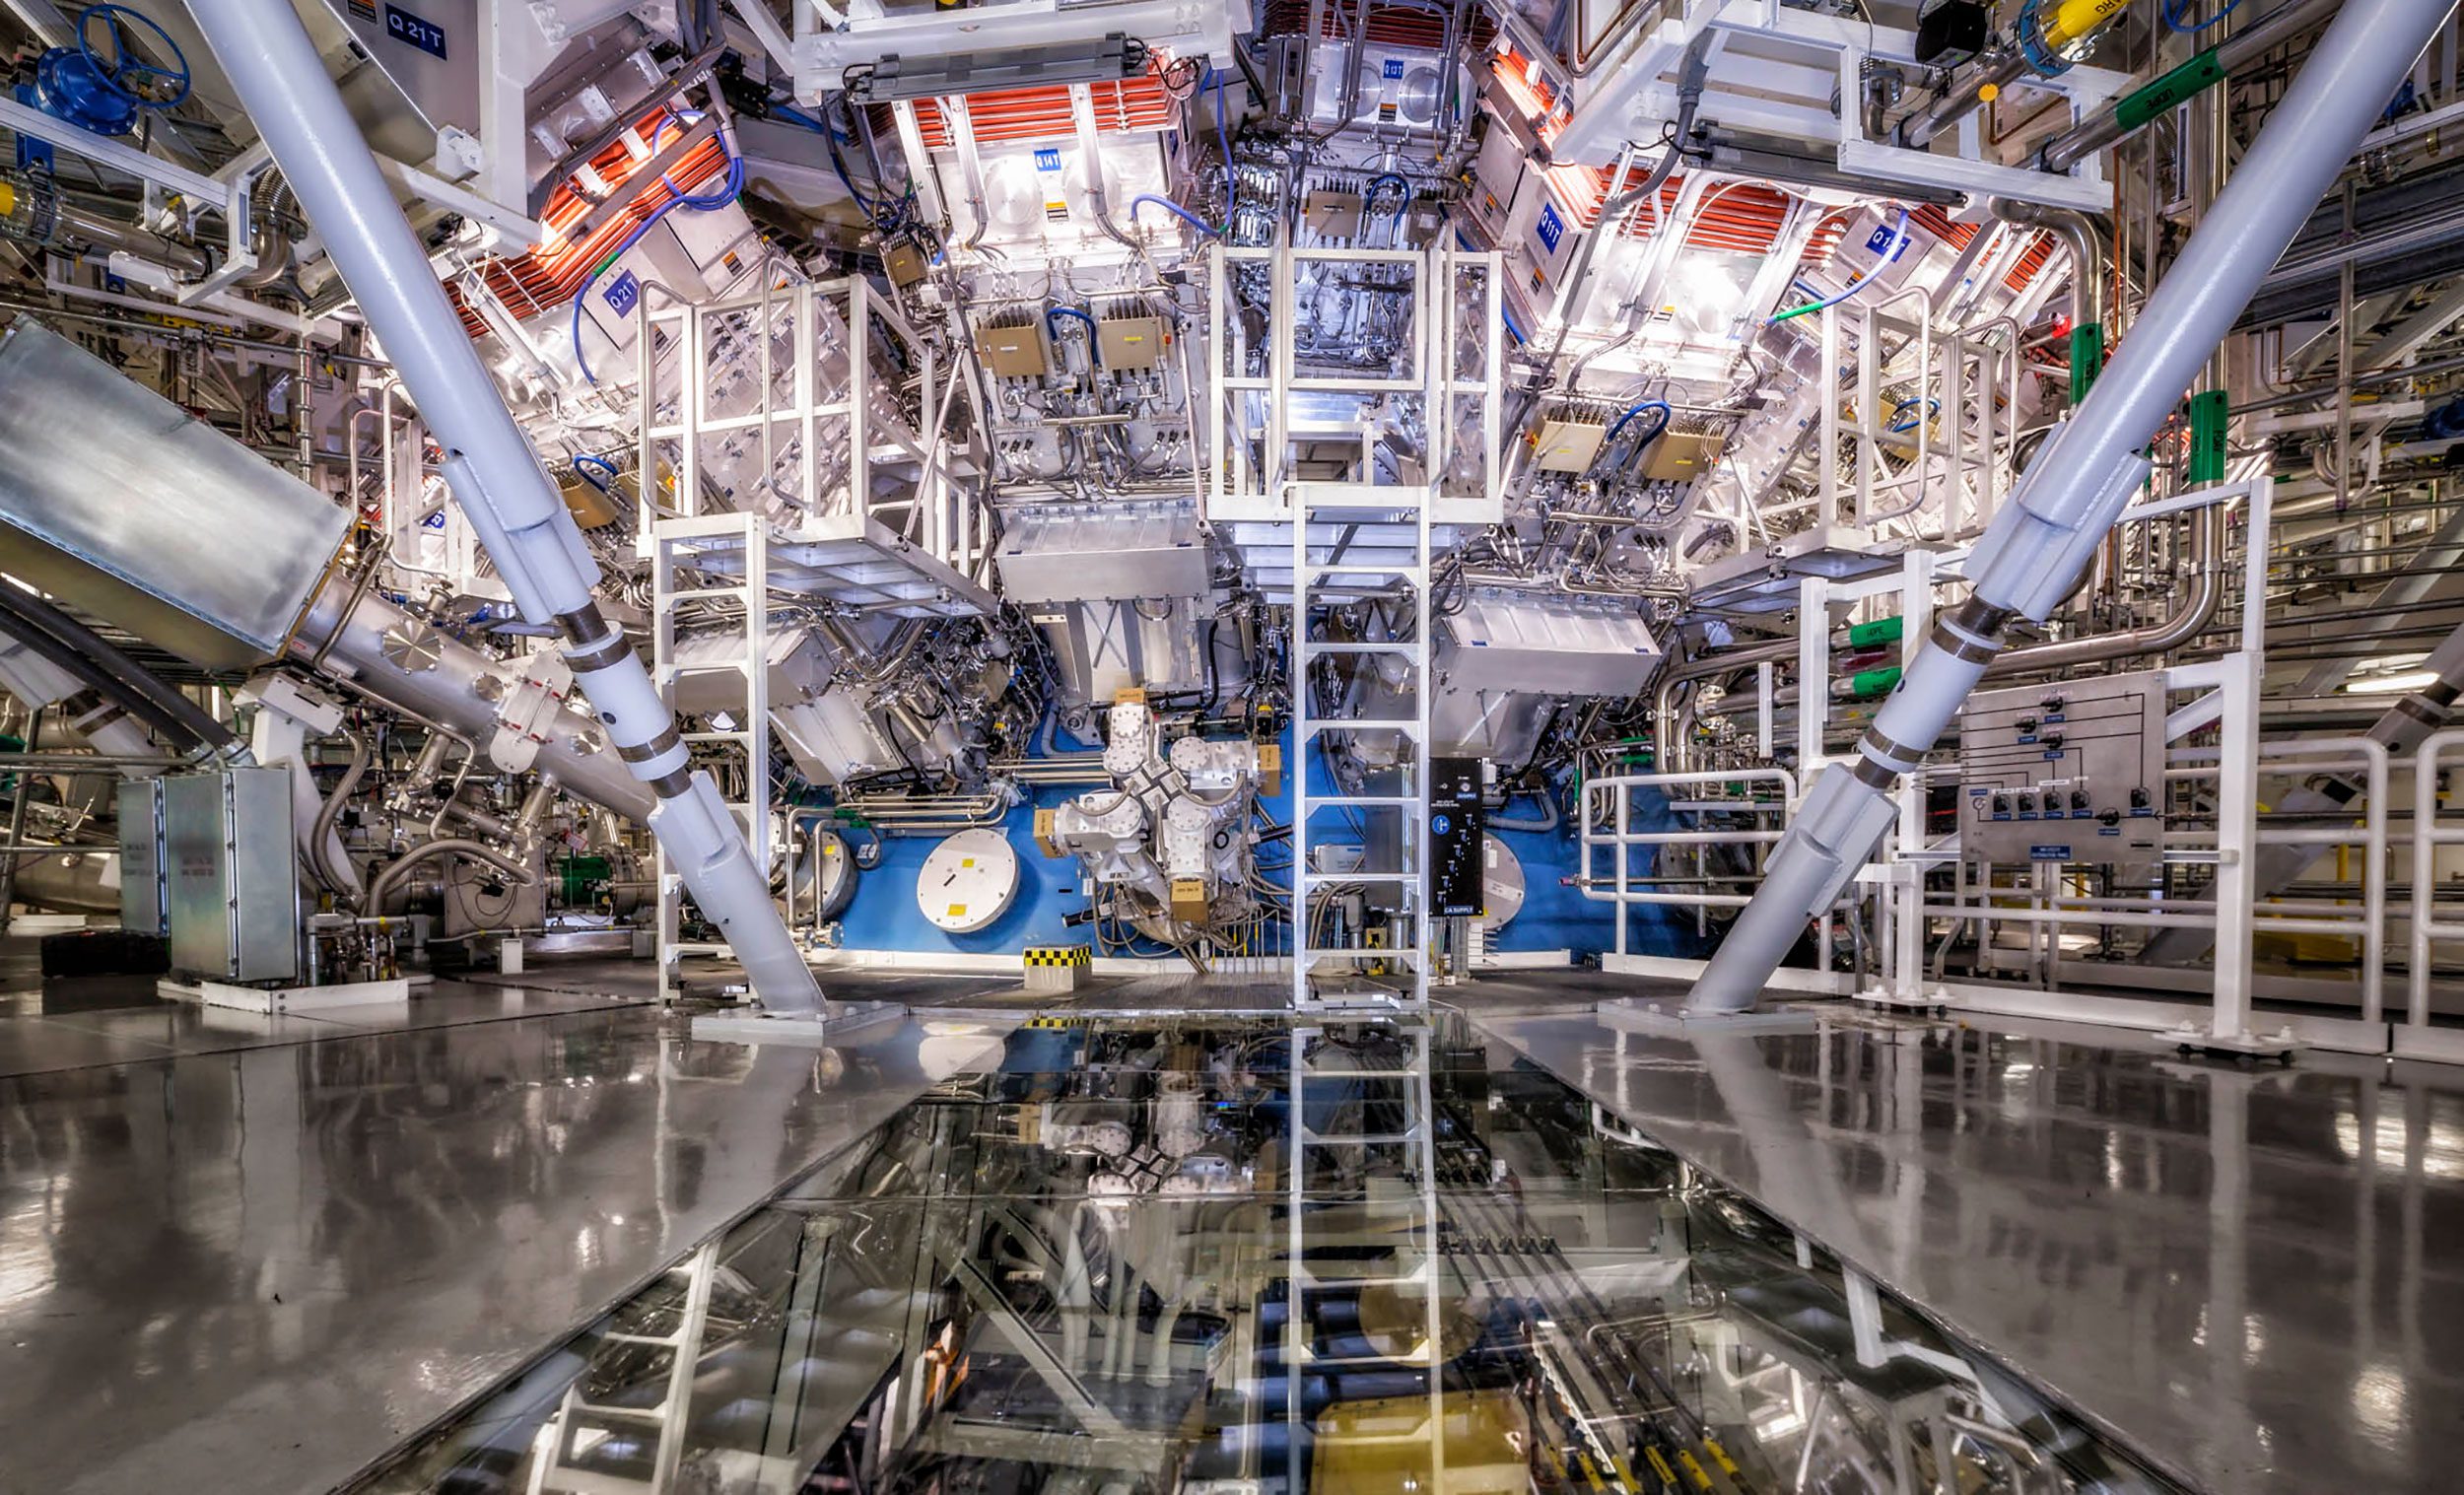 The magic is the target chamber at the National Ignition Facility at Lawrence Livermore National Laboratory in California: temperatures of 100 million degrees and pressures extreme enough to press the target to densities up to 100 times that of lead.  (Damien Jamieson/LLNL)